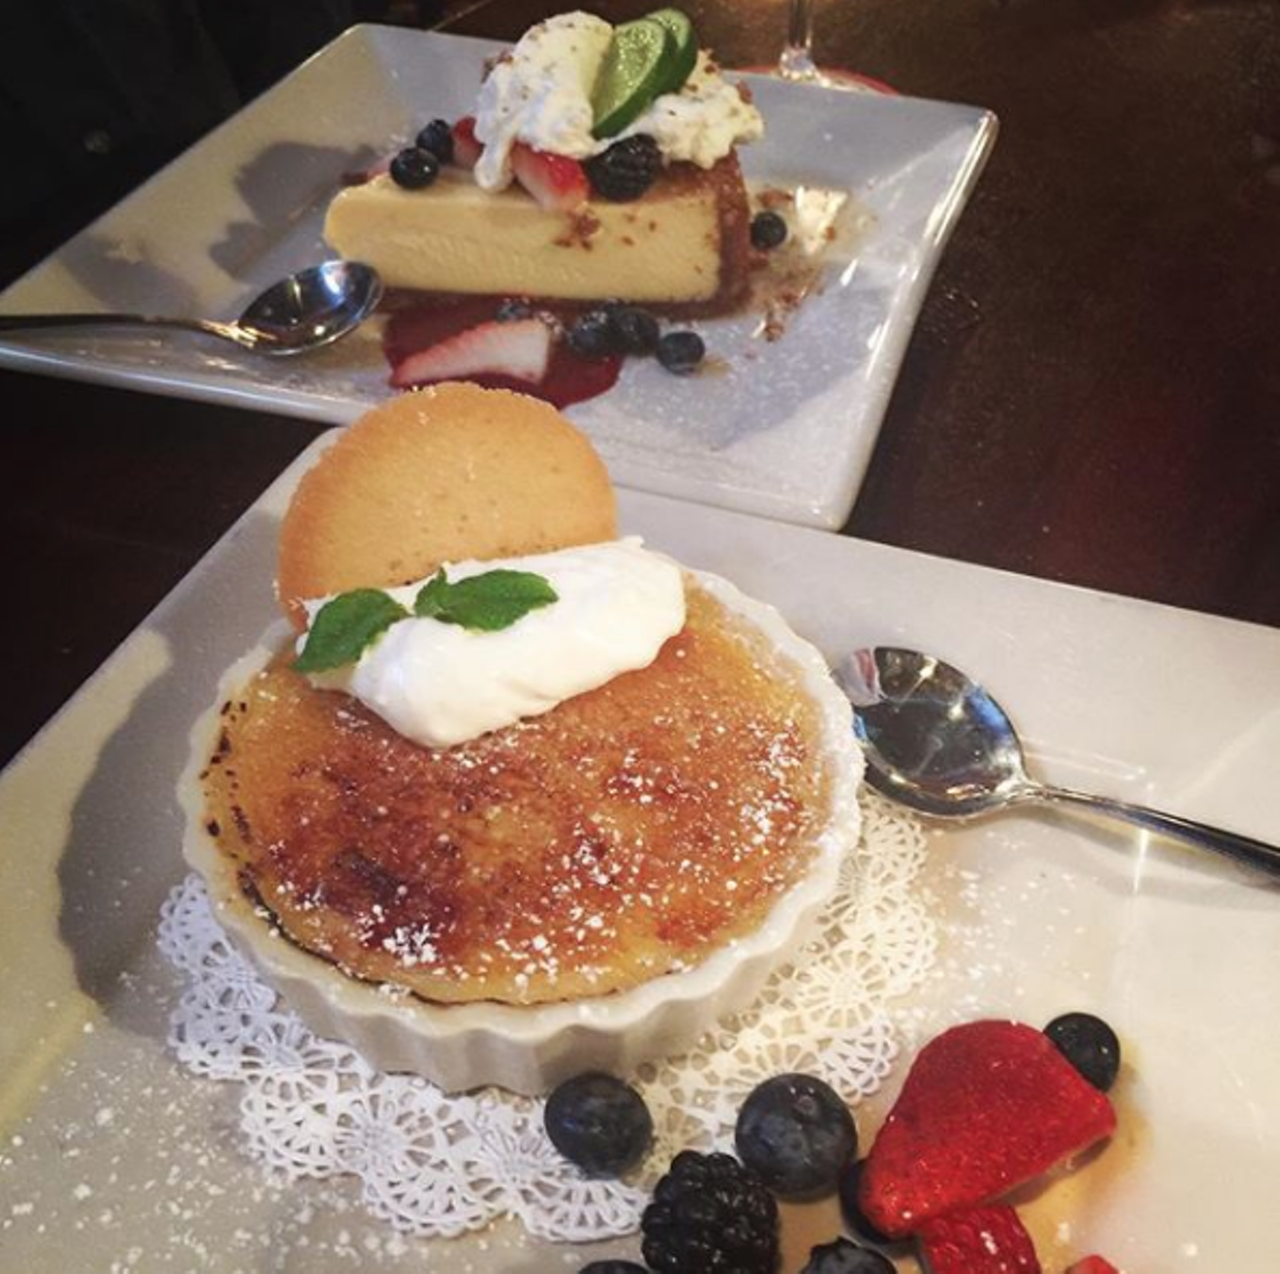 Pappadeaux Seafood Kitchen
Multiple locations, pappadeaux.com
Go the seafood route on your birthday with Pappadeaux and you can enjoy a free dessert with the purchase of an entree. Don’t forget to sign up for the email list.
Photo via Instagram / gigzgabyte